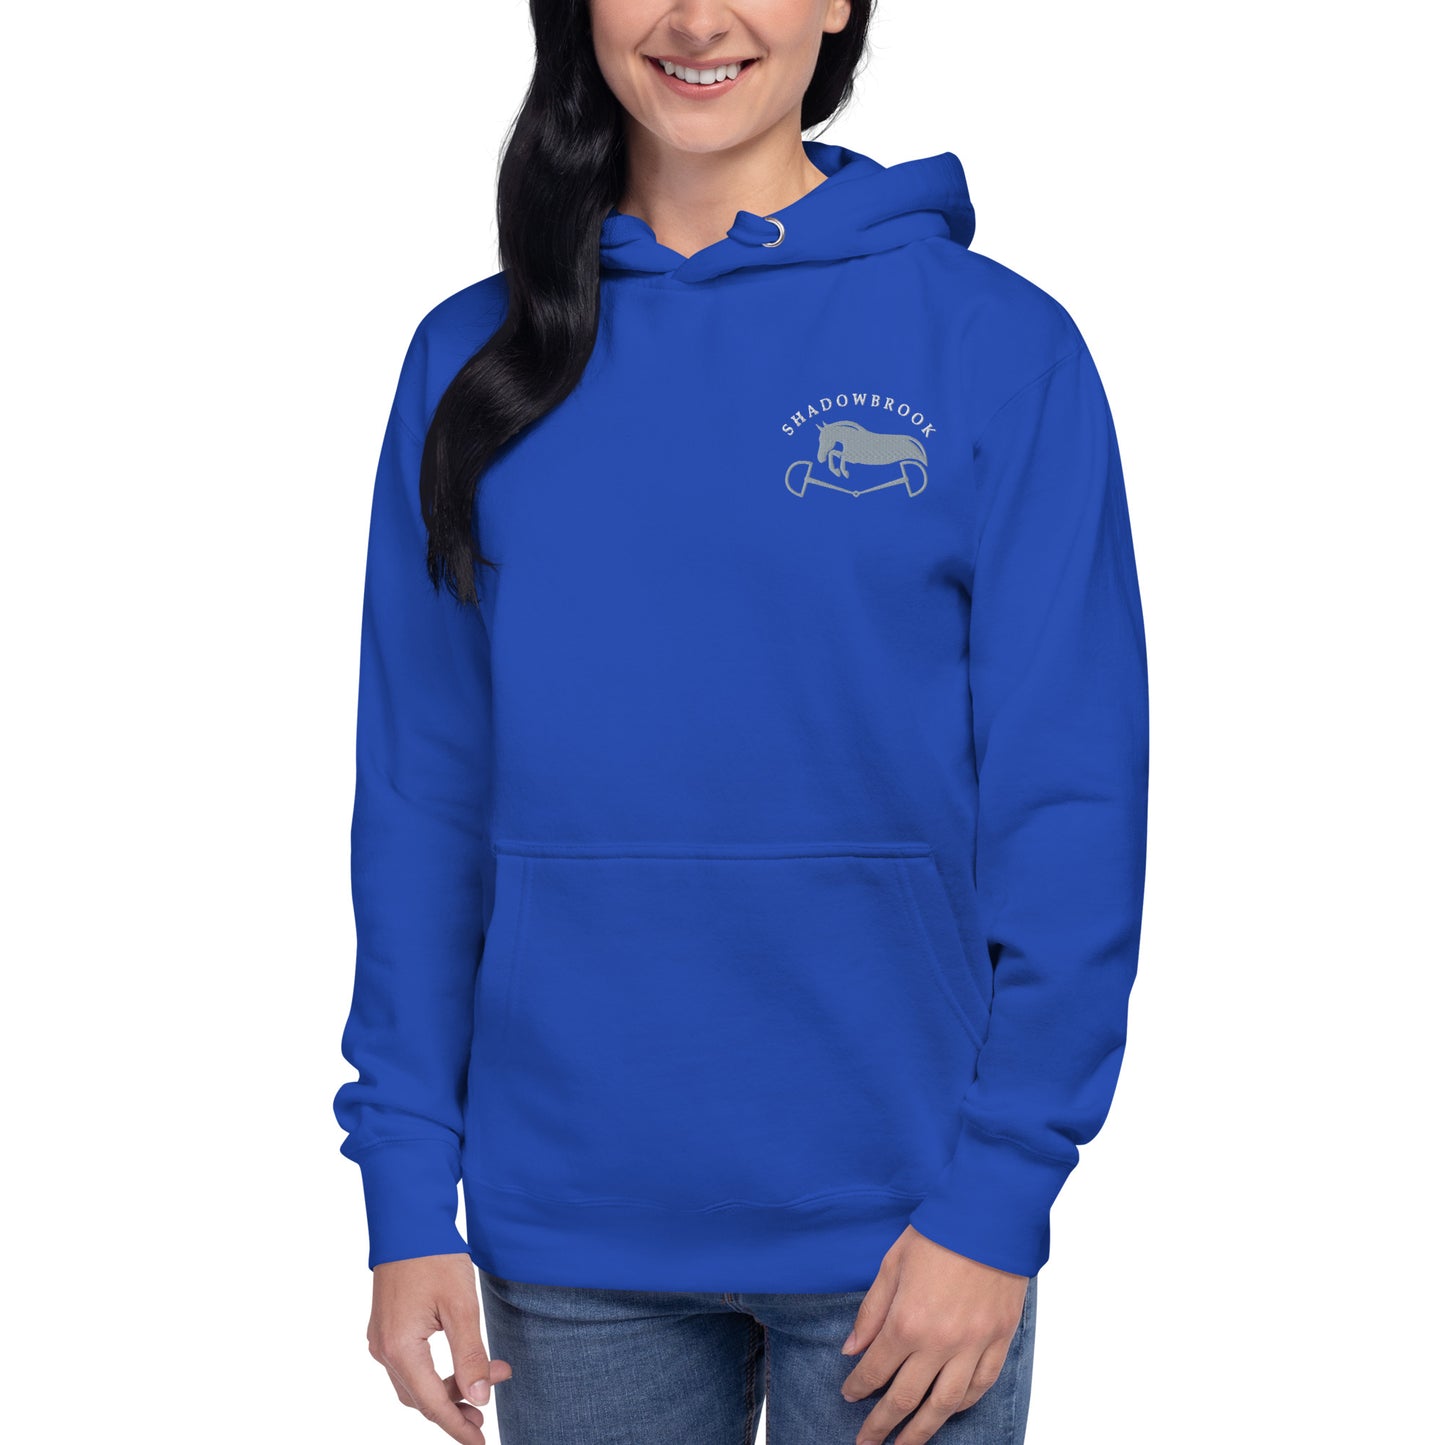 Shadowbrook Stables Royal Blue Unisex Hoodie - Small Logo Front